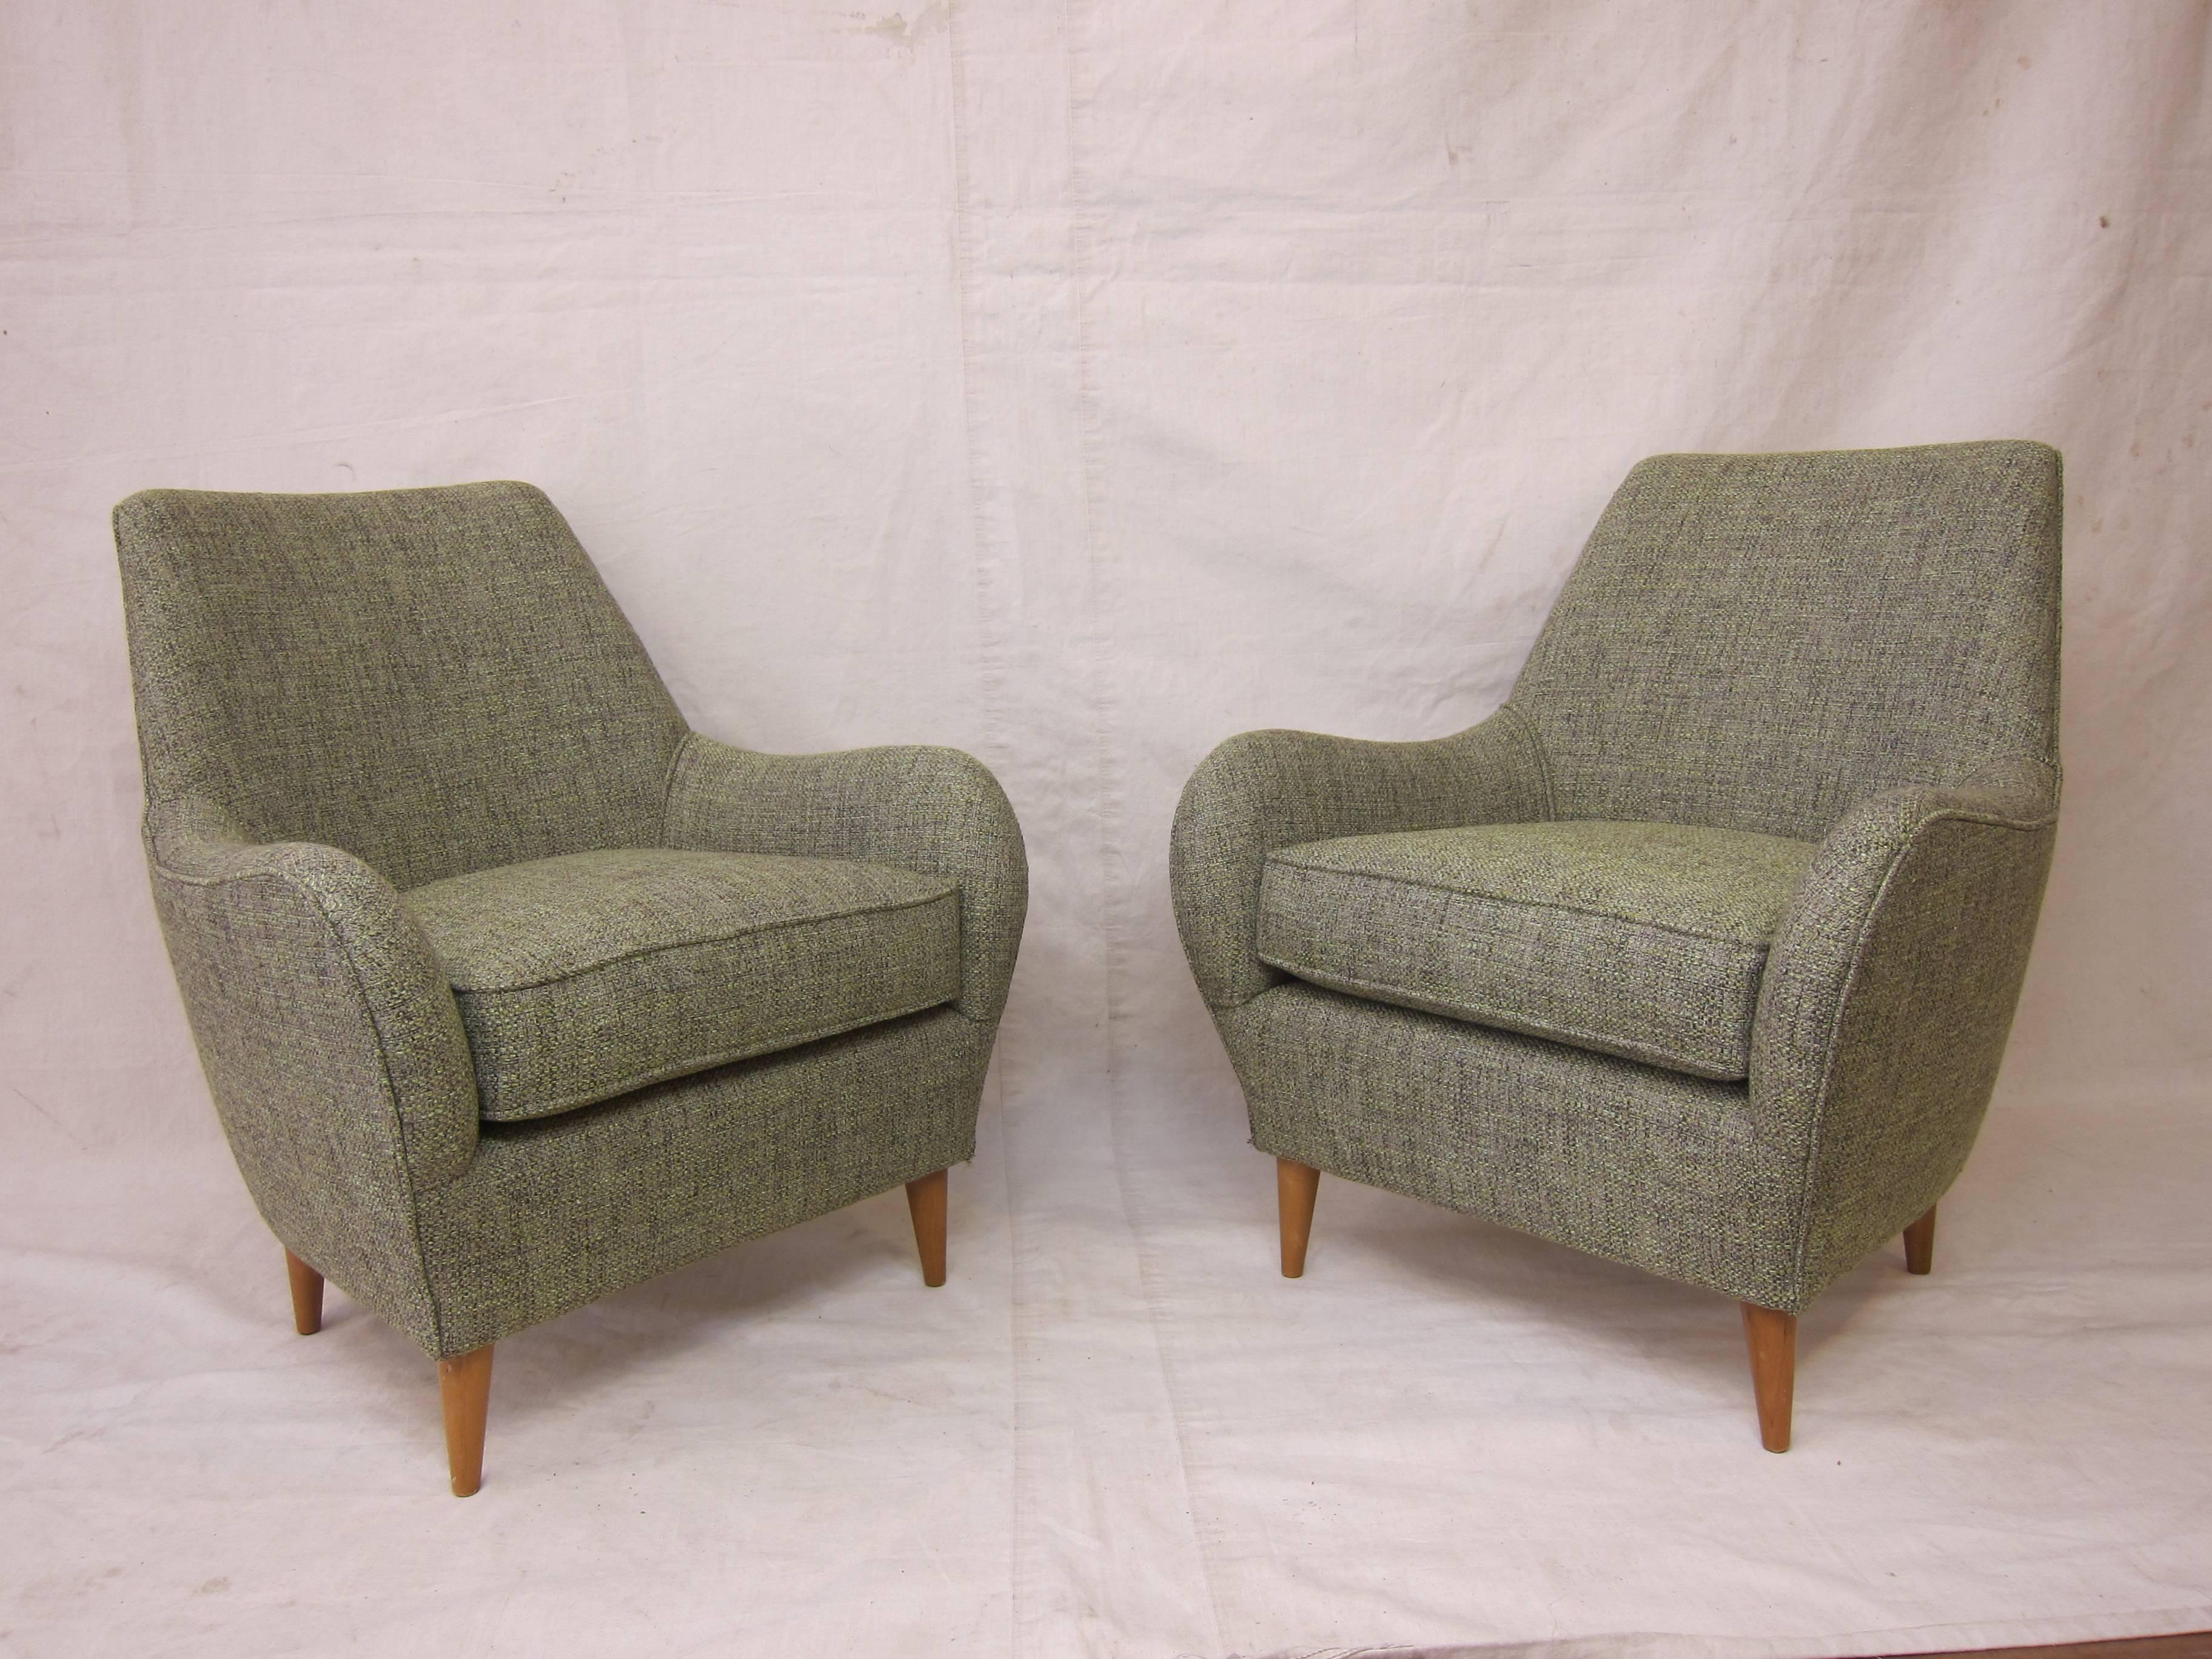 Exceptional 1950's sculpted Italian Club Chairs.  Very comfortable, great size having a smaller foot print, newly upholstered.   